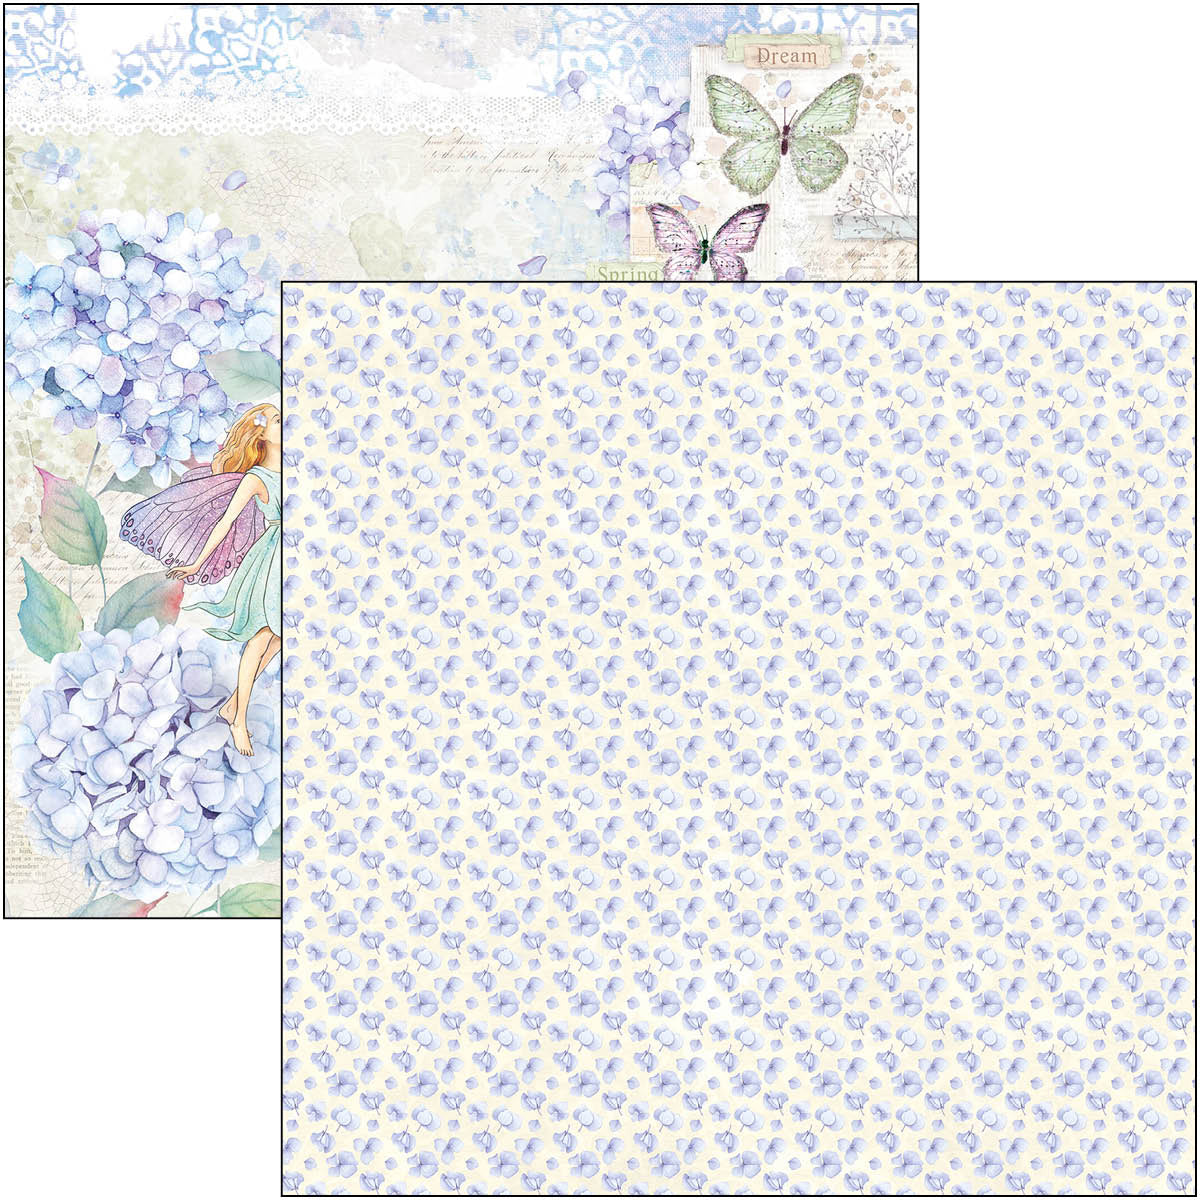 Stamperia Blue Land Double-Sided Paper Pad, 12 x 12